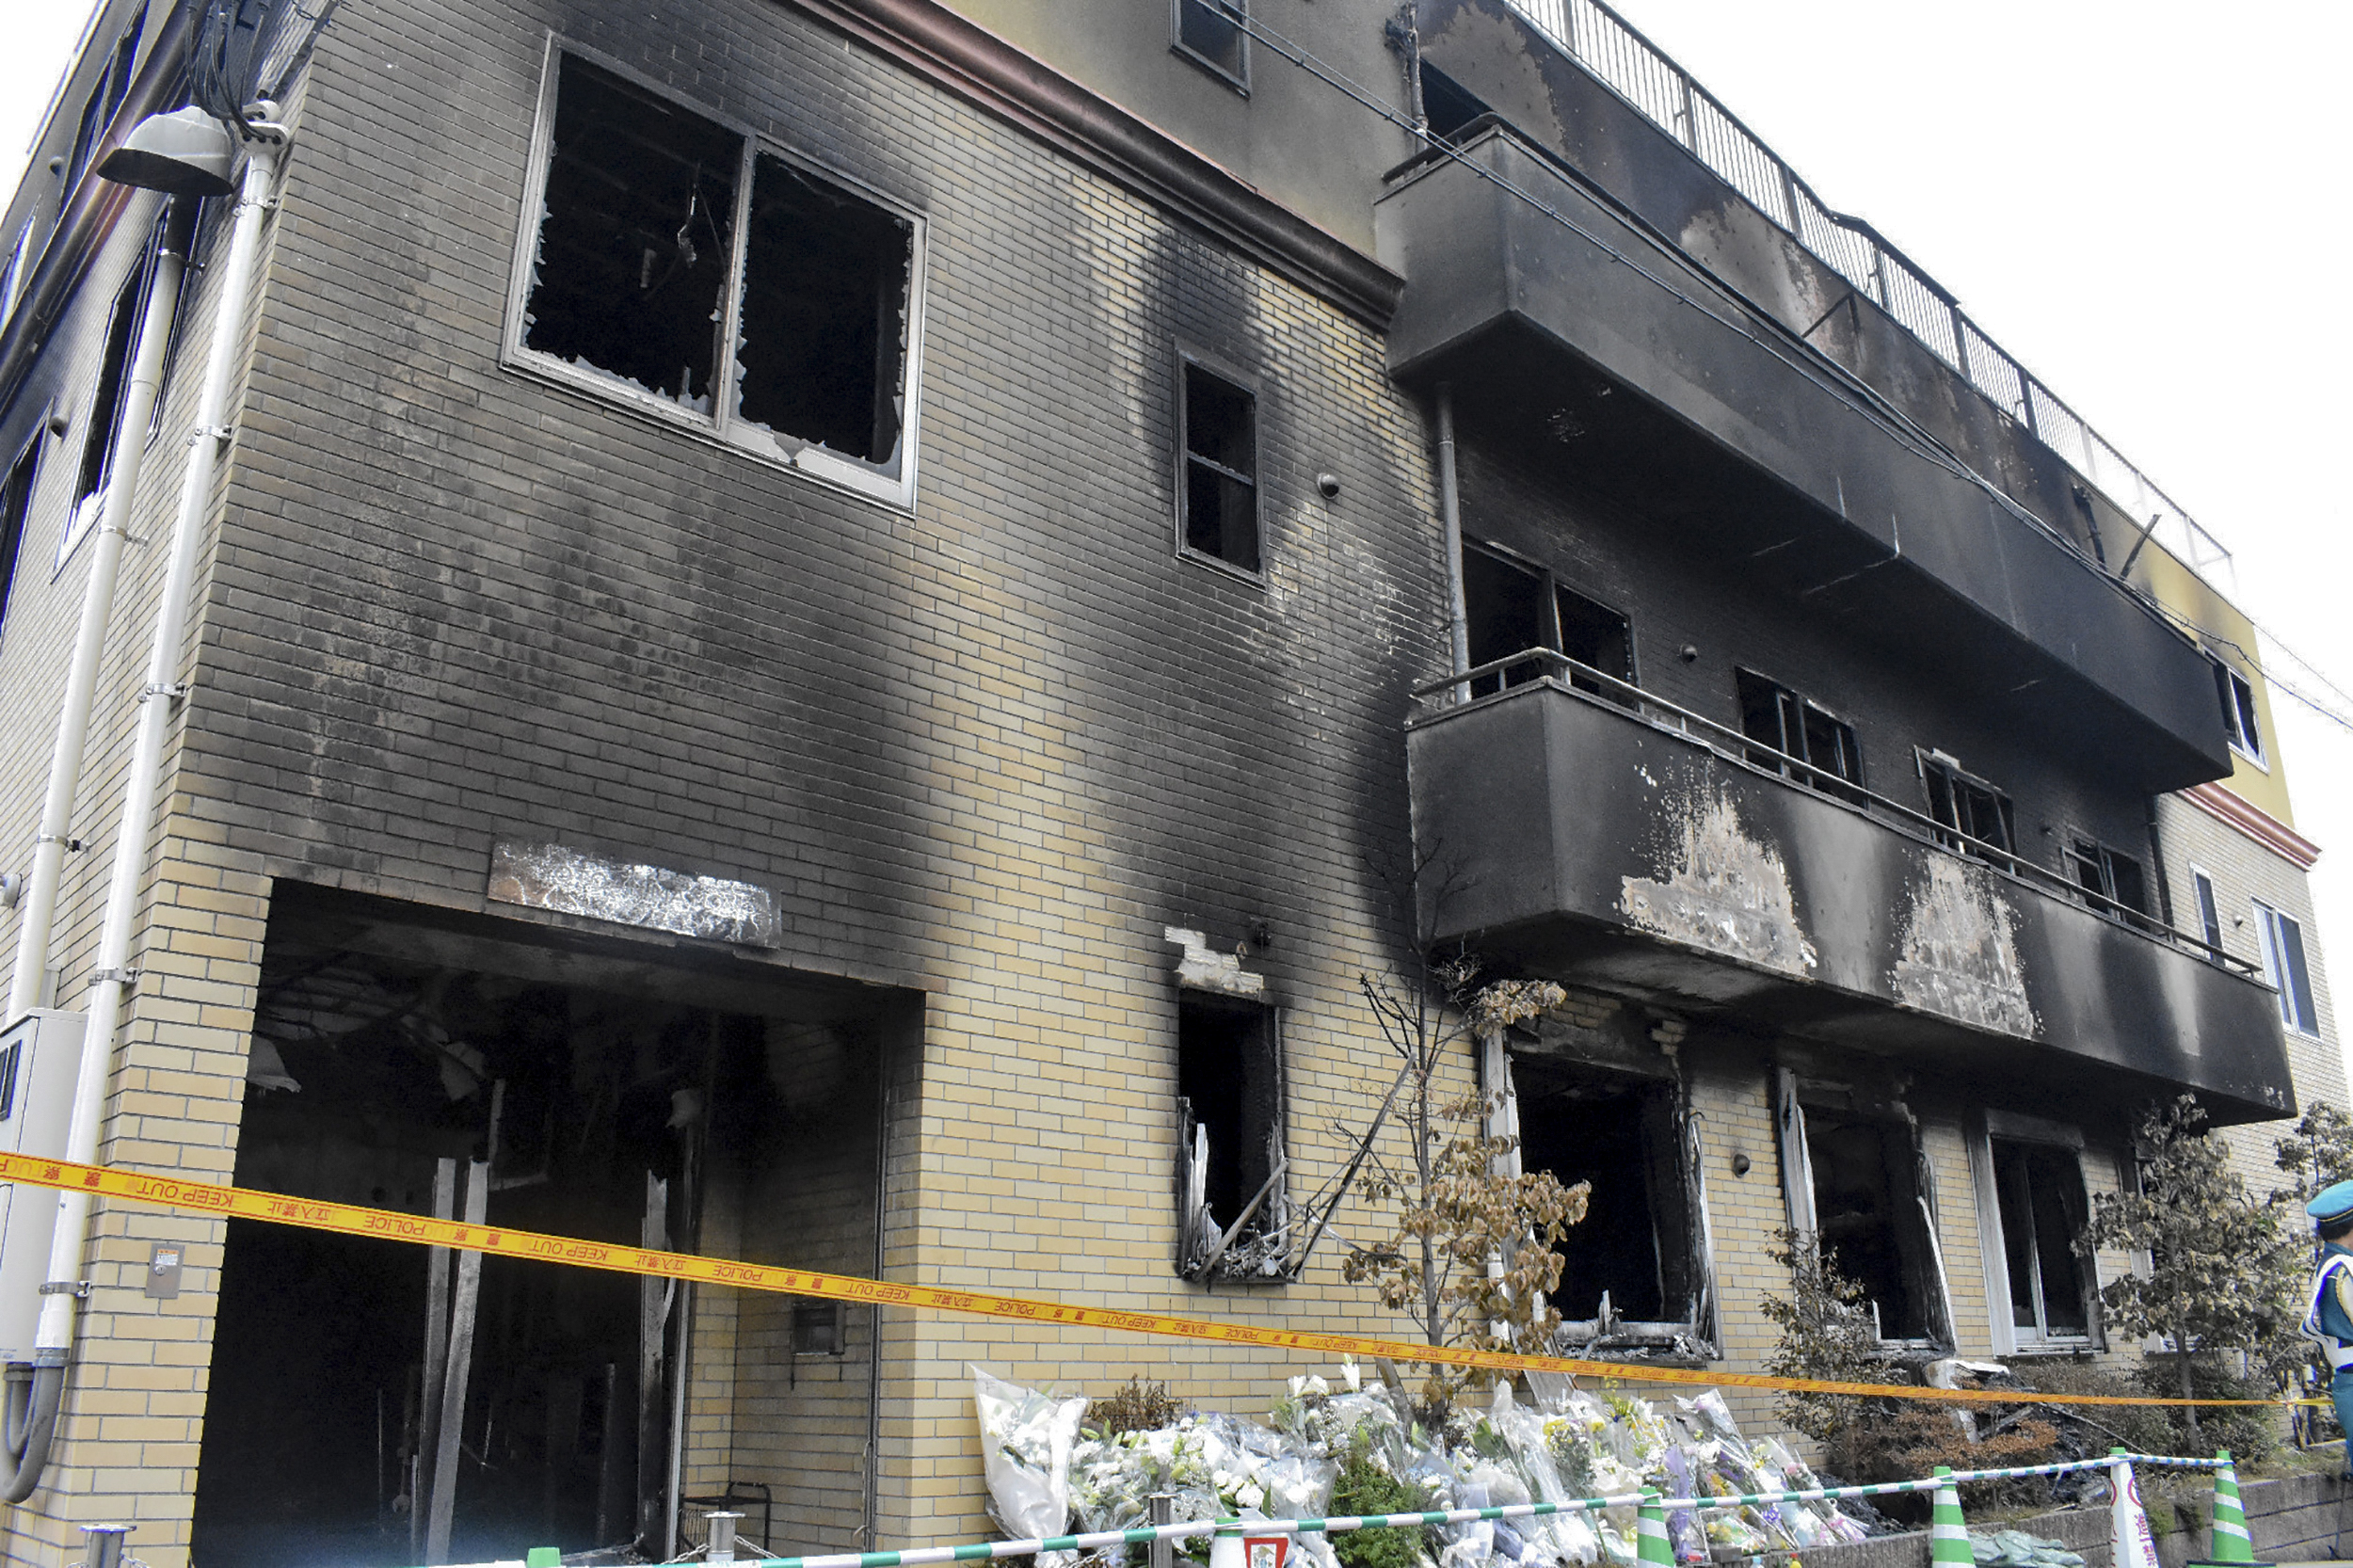 Founder of Japanese Anime Studio Speaks Out After Deadly Arson Attack, Says  'Our Hearts Ached'